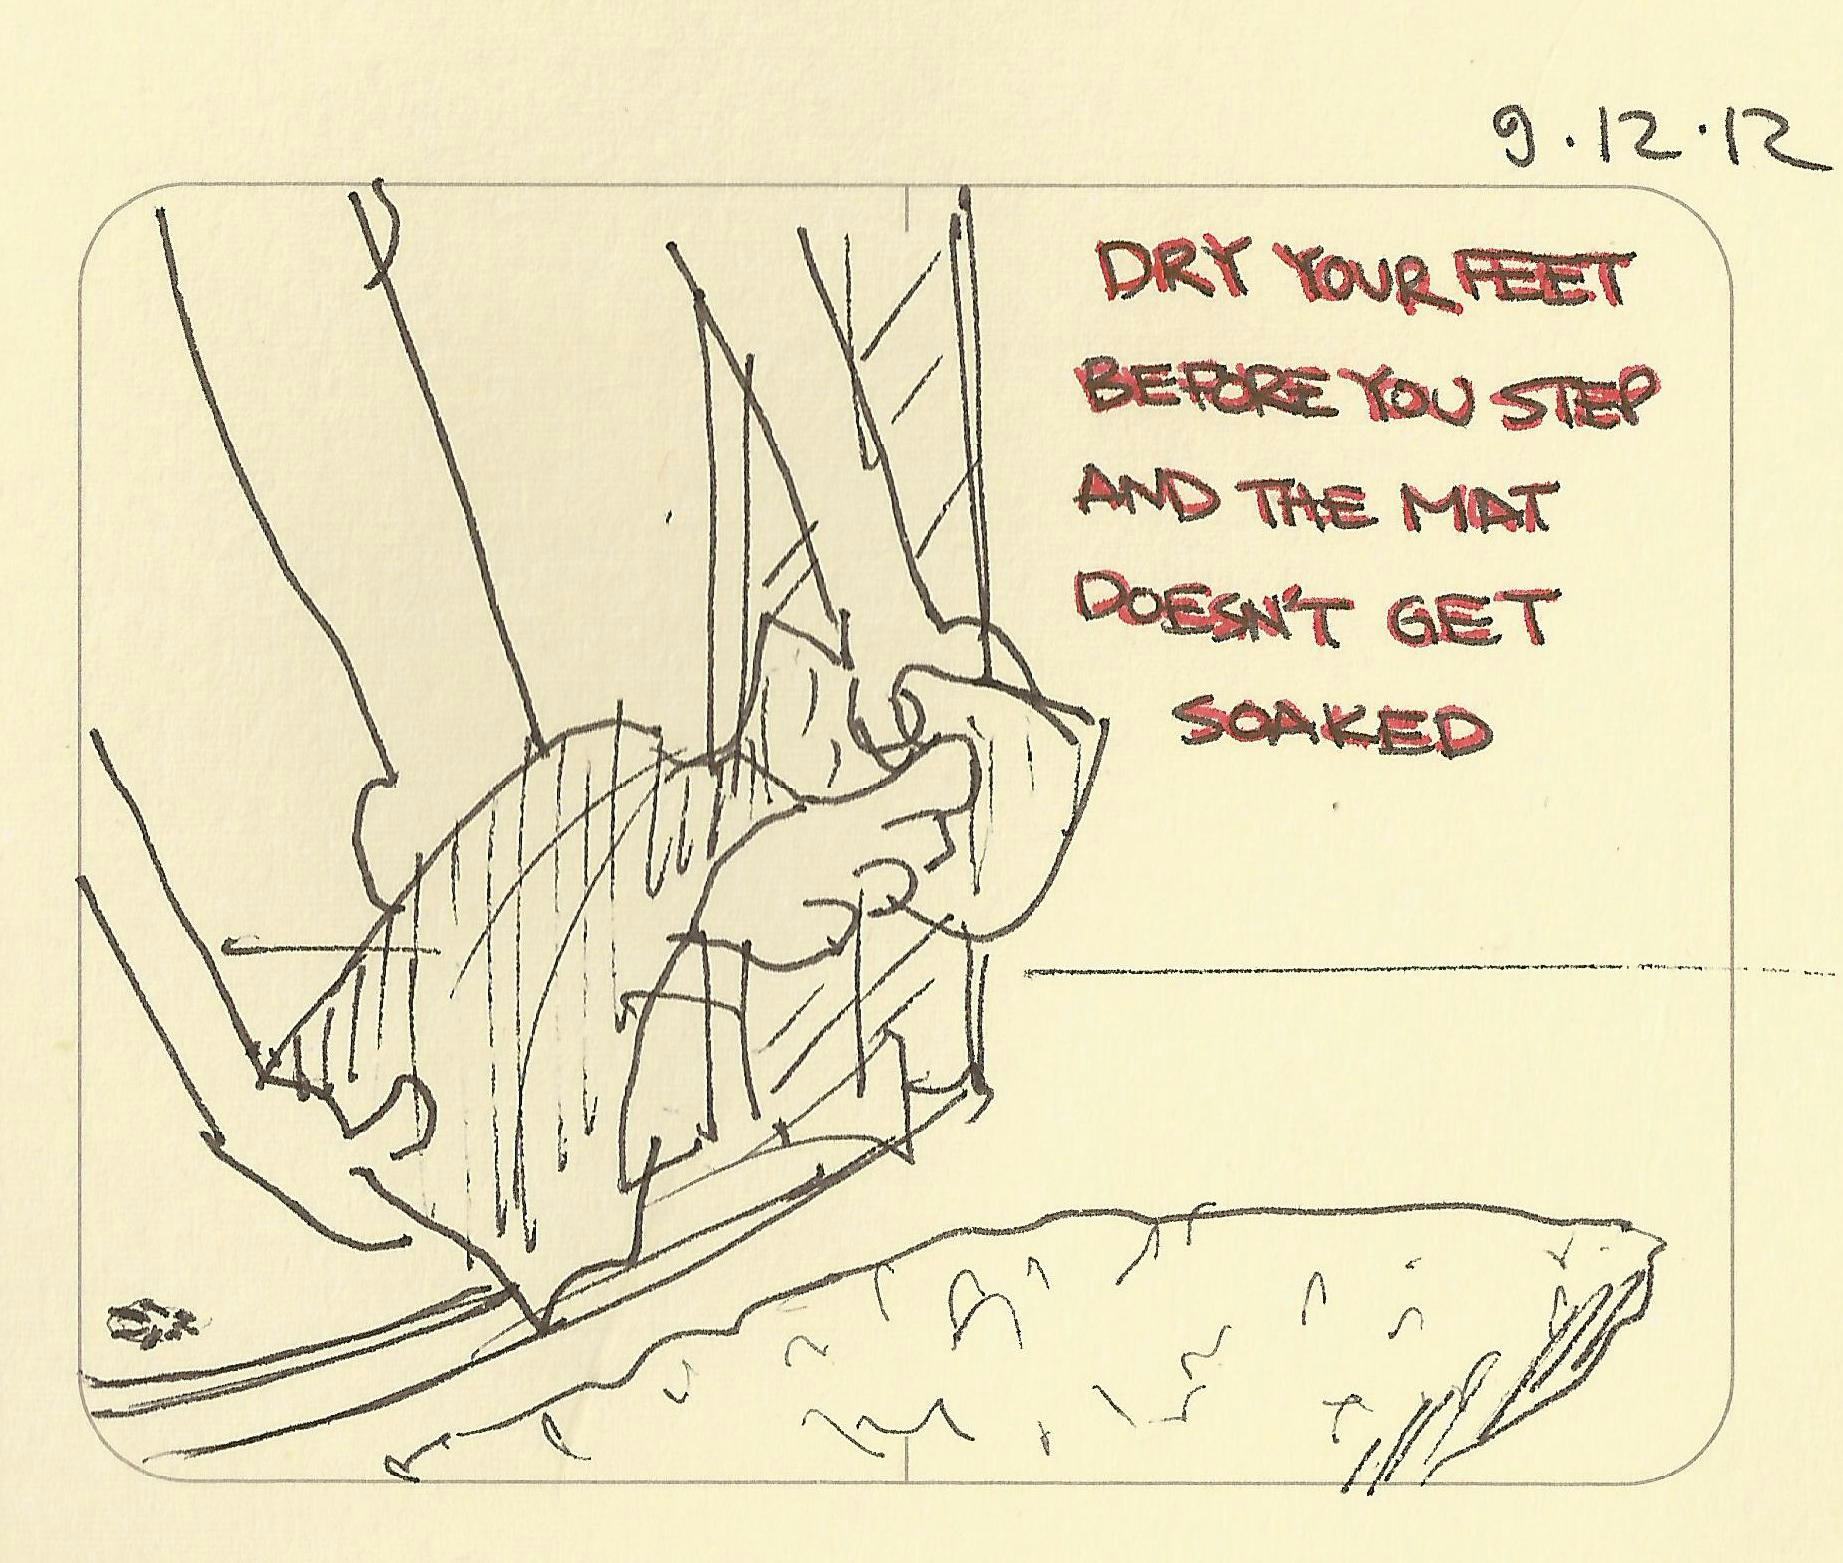 Dry your feet first - Sketchplanations